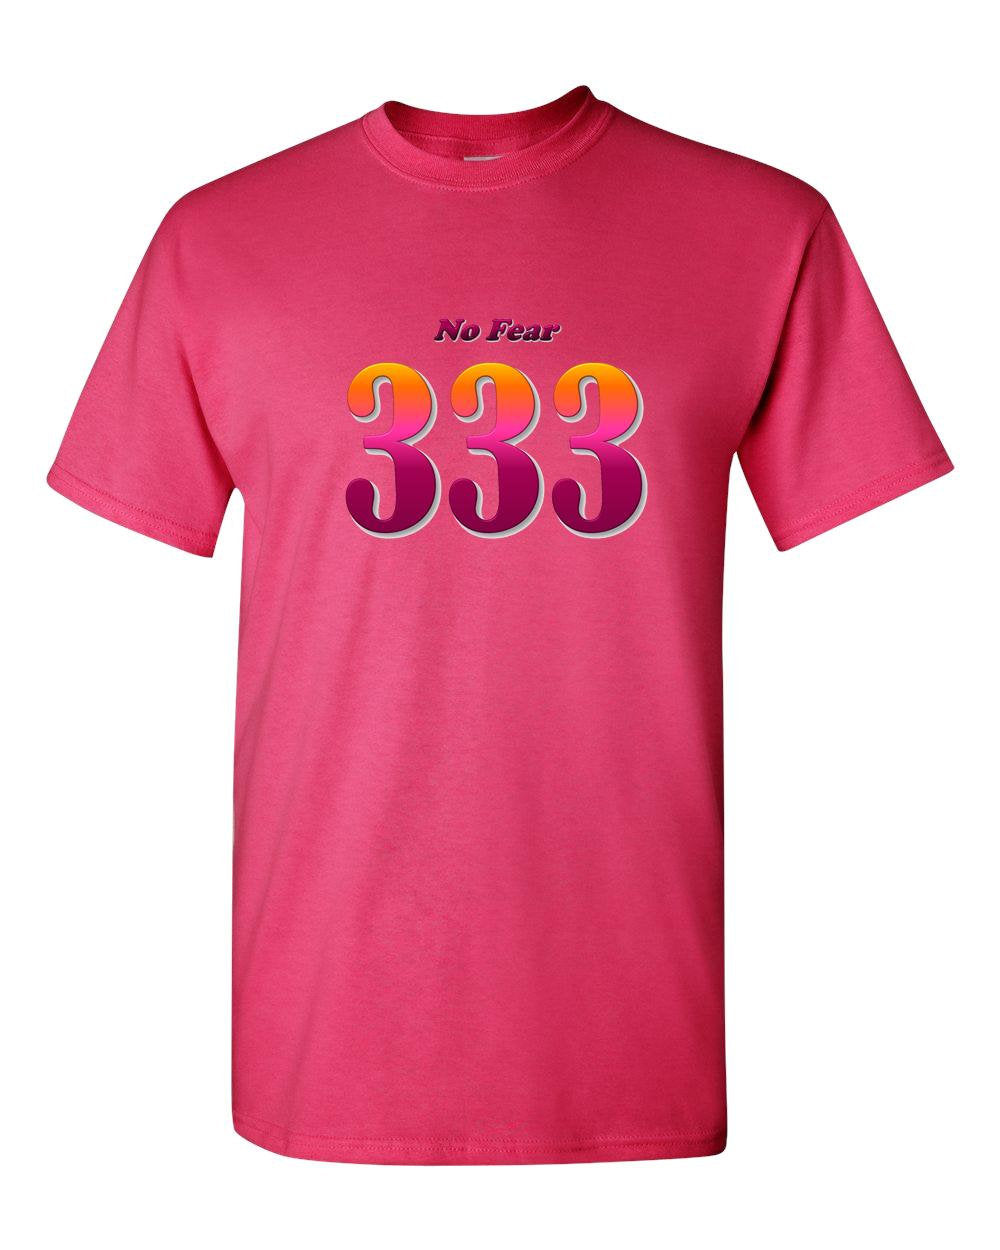 Angel Numbers - No Fear 333 - Adult Unisex T-Shirt